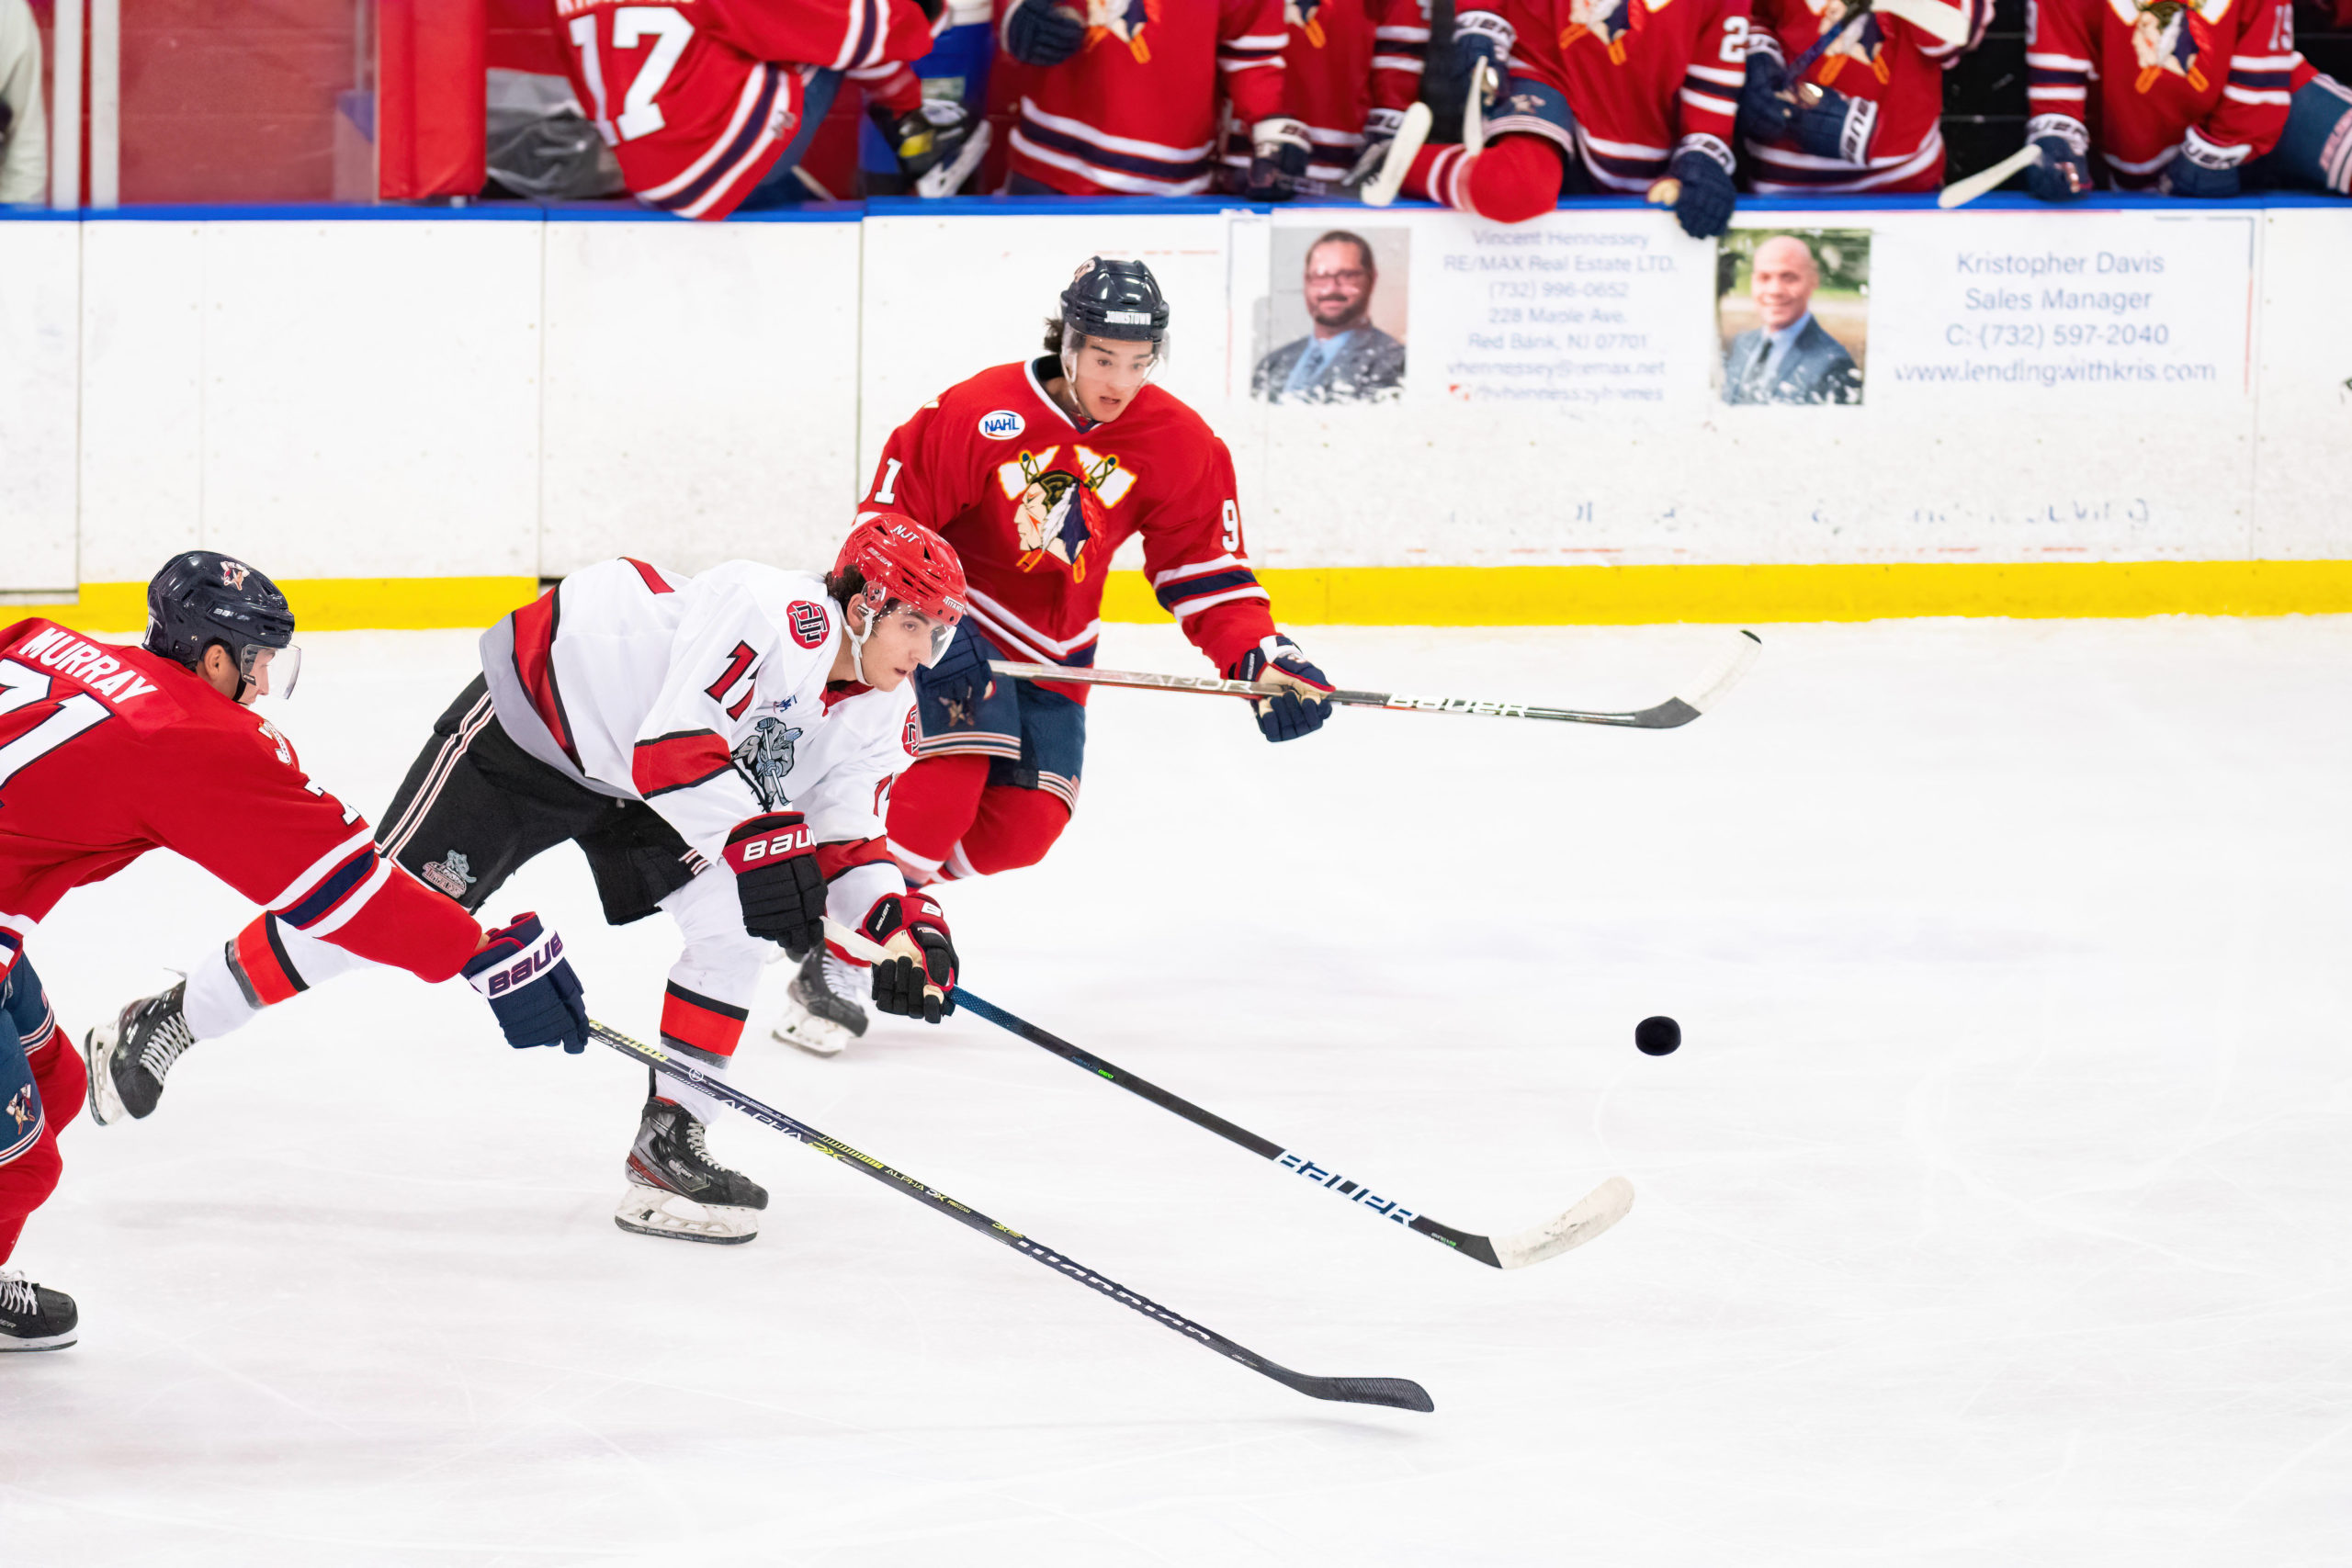 Weekend Preview: December 10 & 11 – Titans visit Tomahawks for two-game series